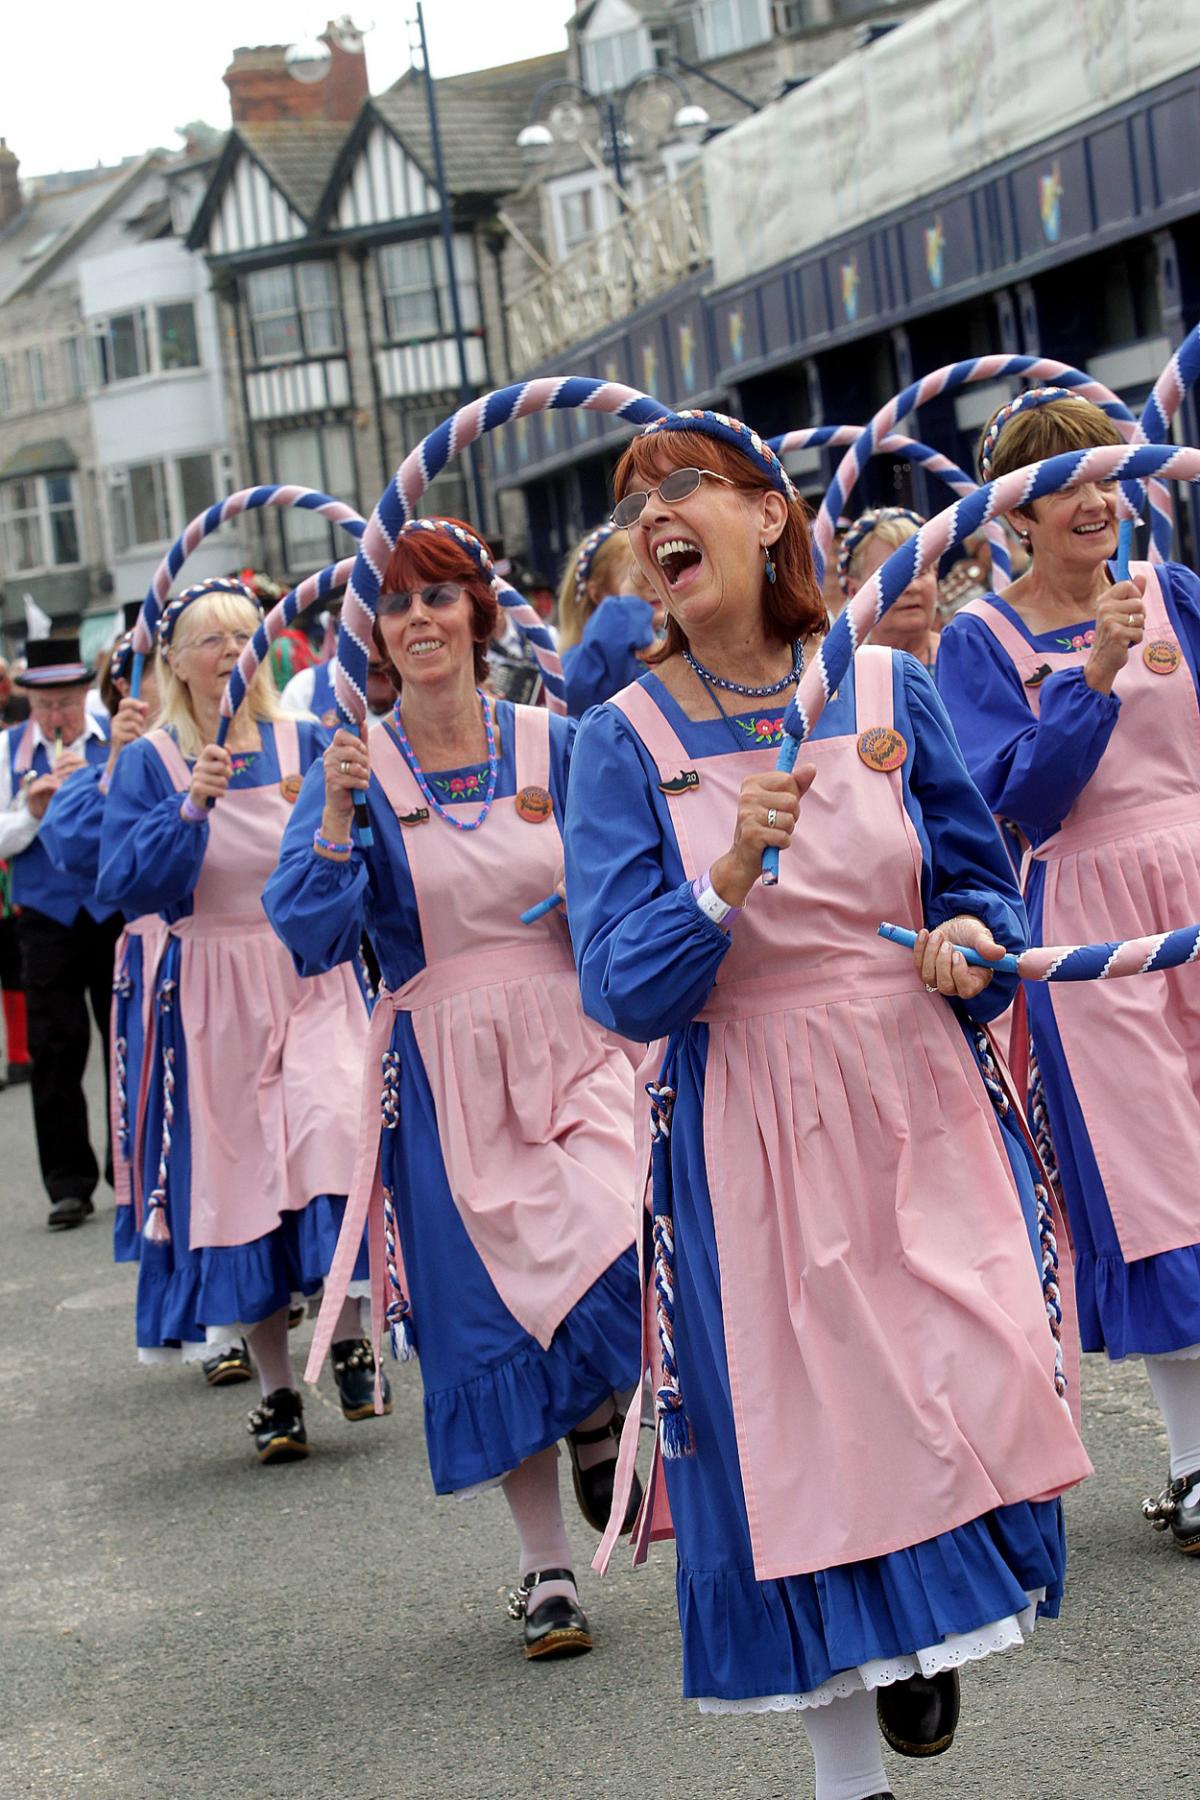 All our pictures from Swanage Folk Festival 2014